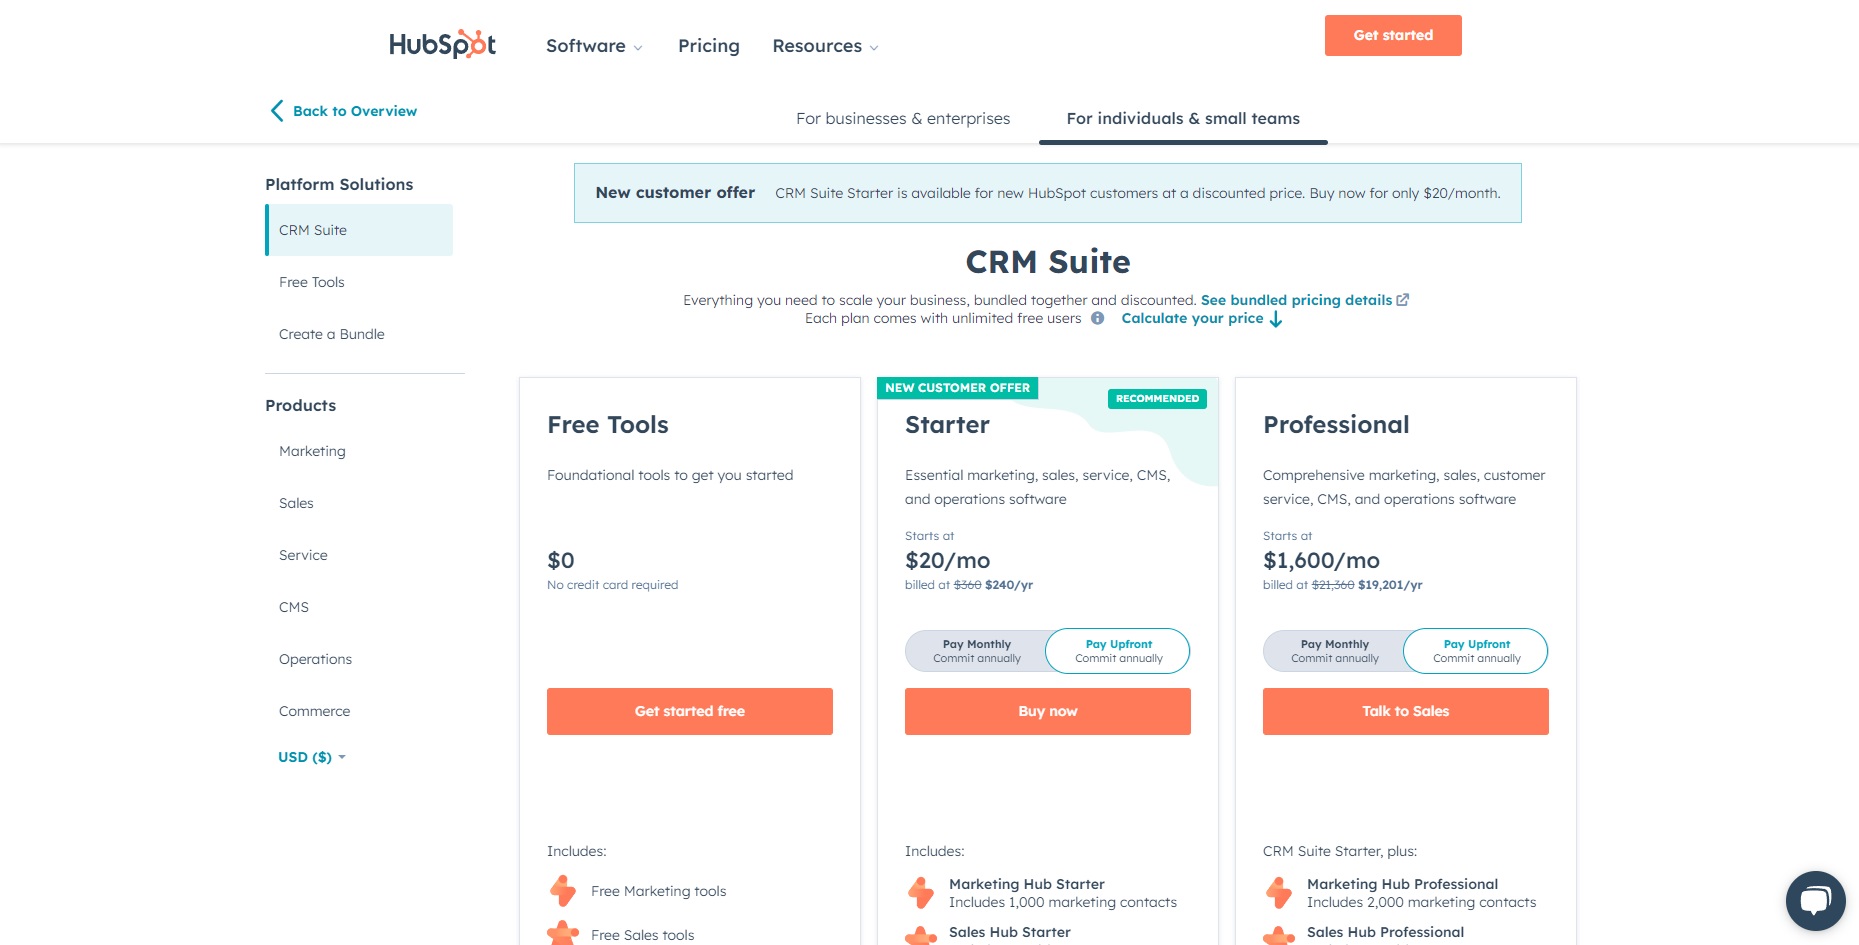 HubSpot pricing page